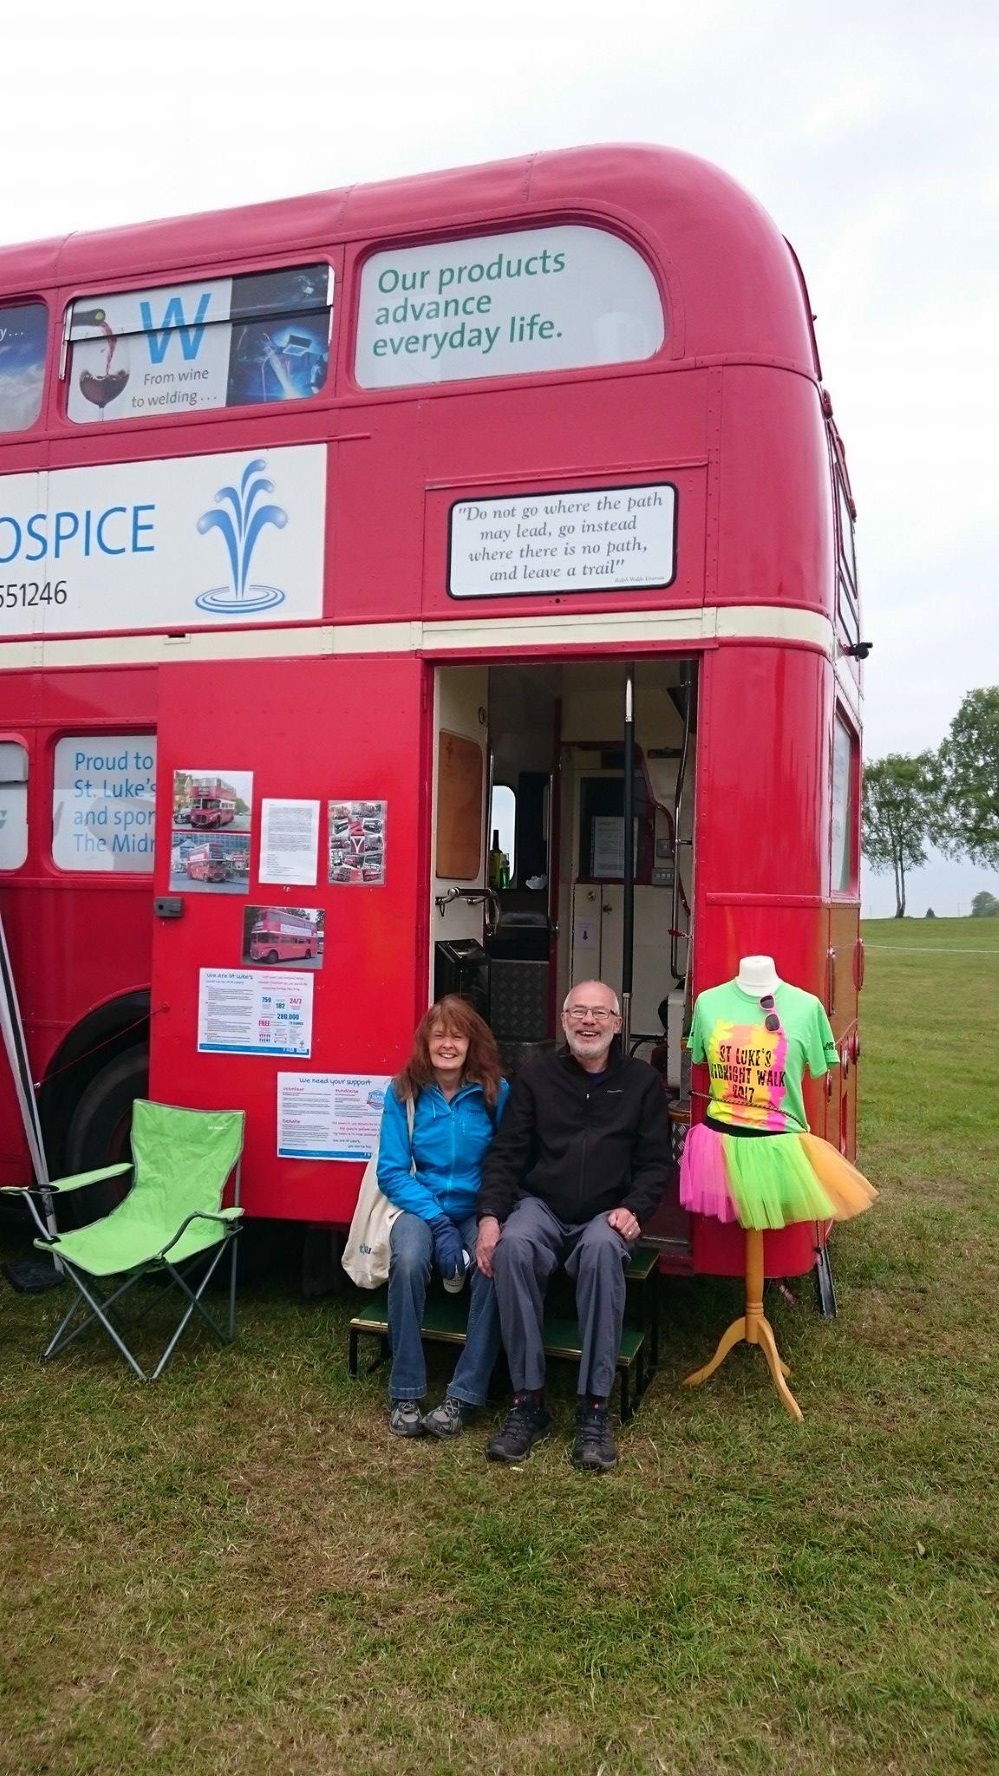 St Lukes Hospice bus hosted various fundraising events over the years